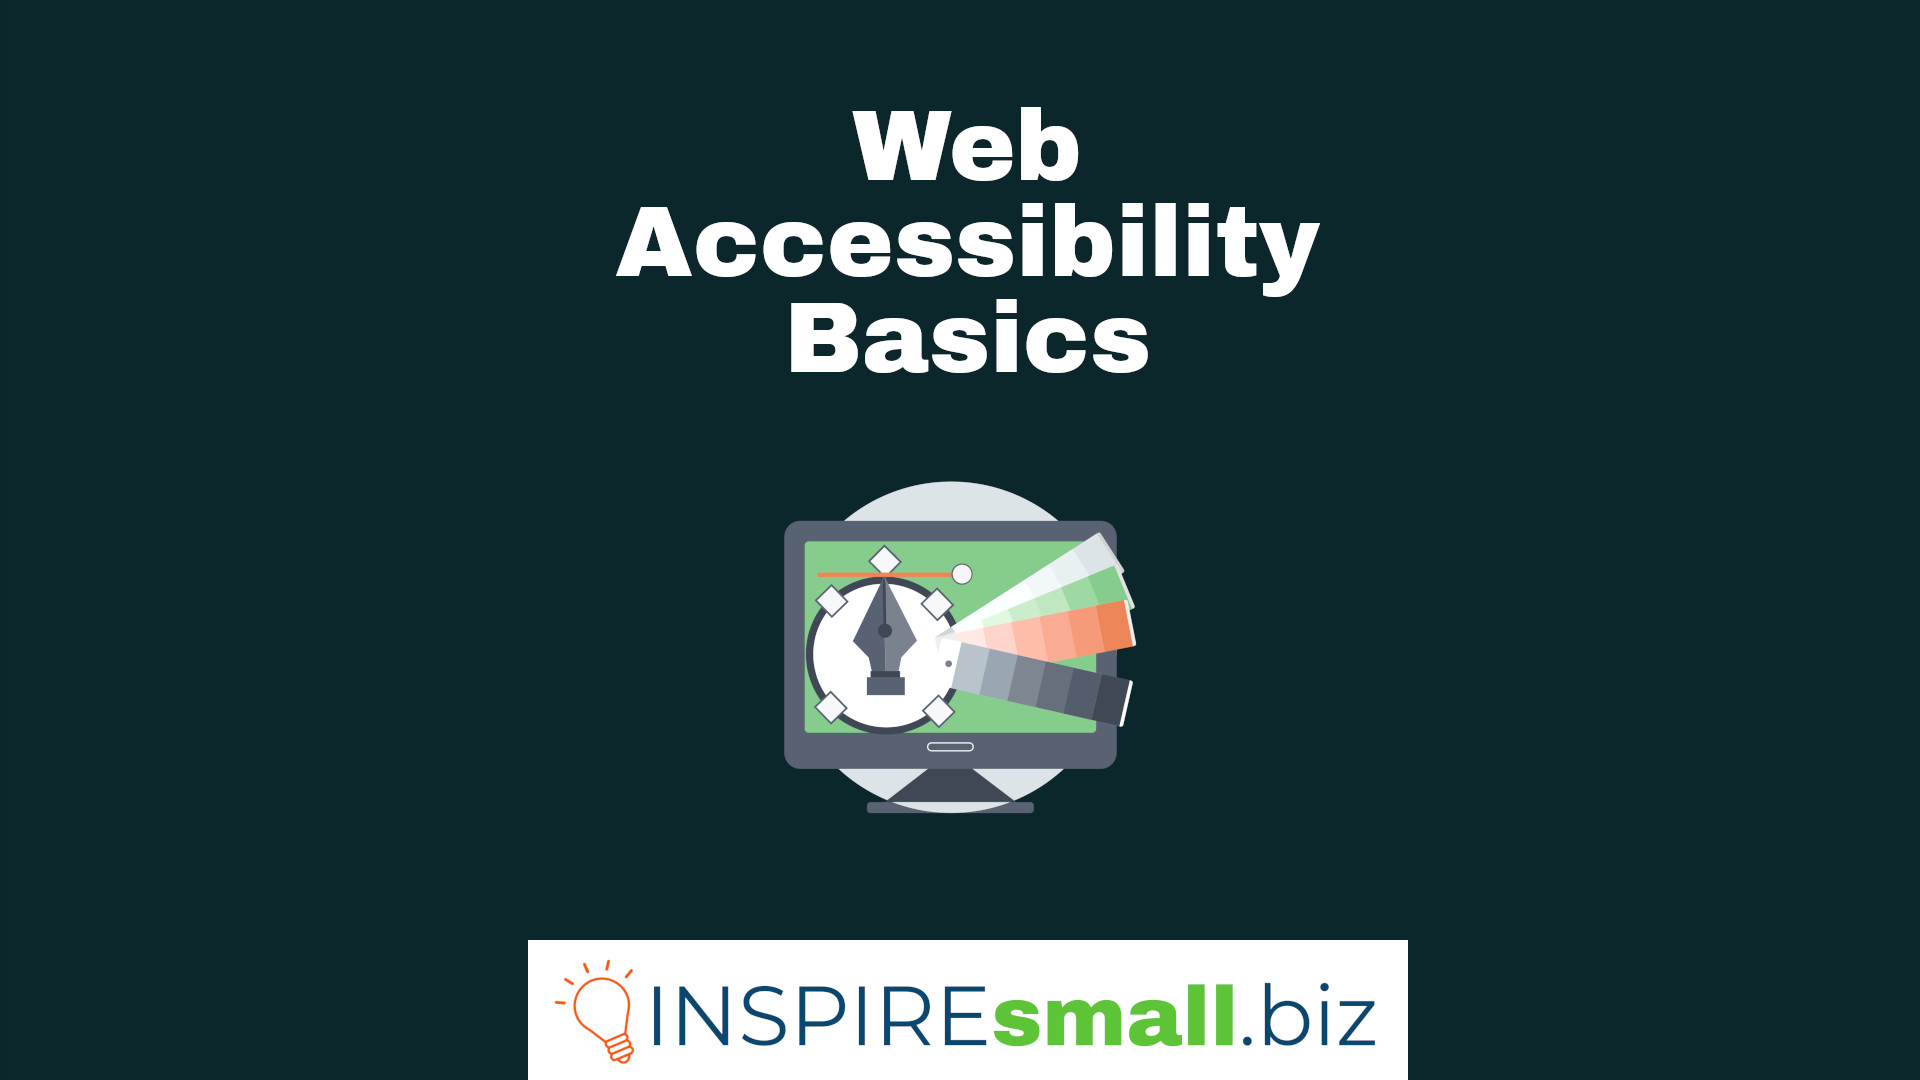 A computer monitor with graphic design elements overlayed, over a dark green background. Text reads Web Accessibility Basics, from INSPIREsmall.biz